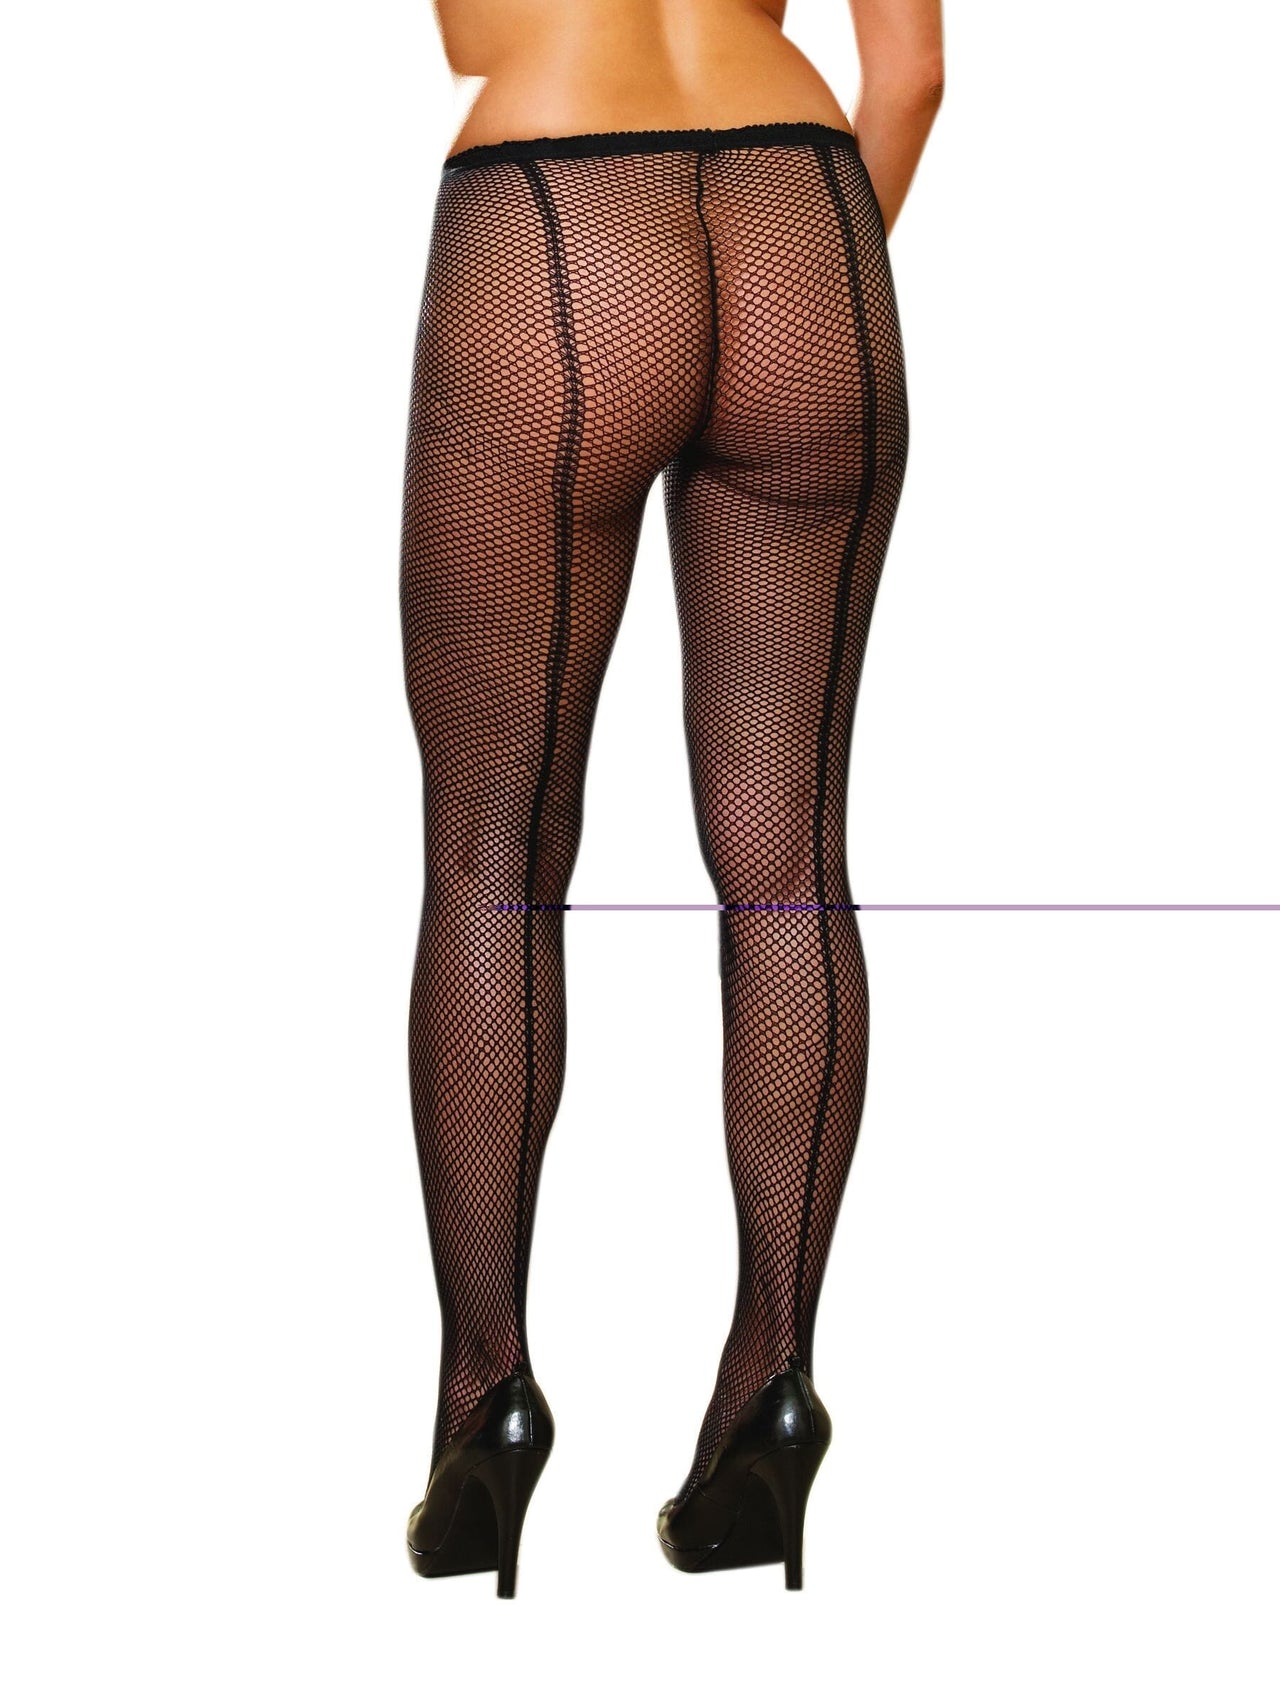 Fishnet tights with back seam.